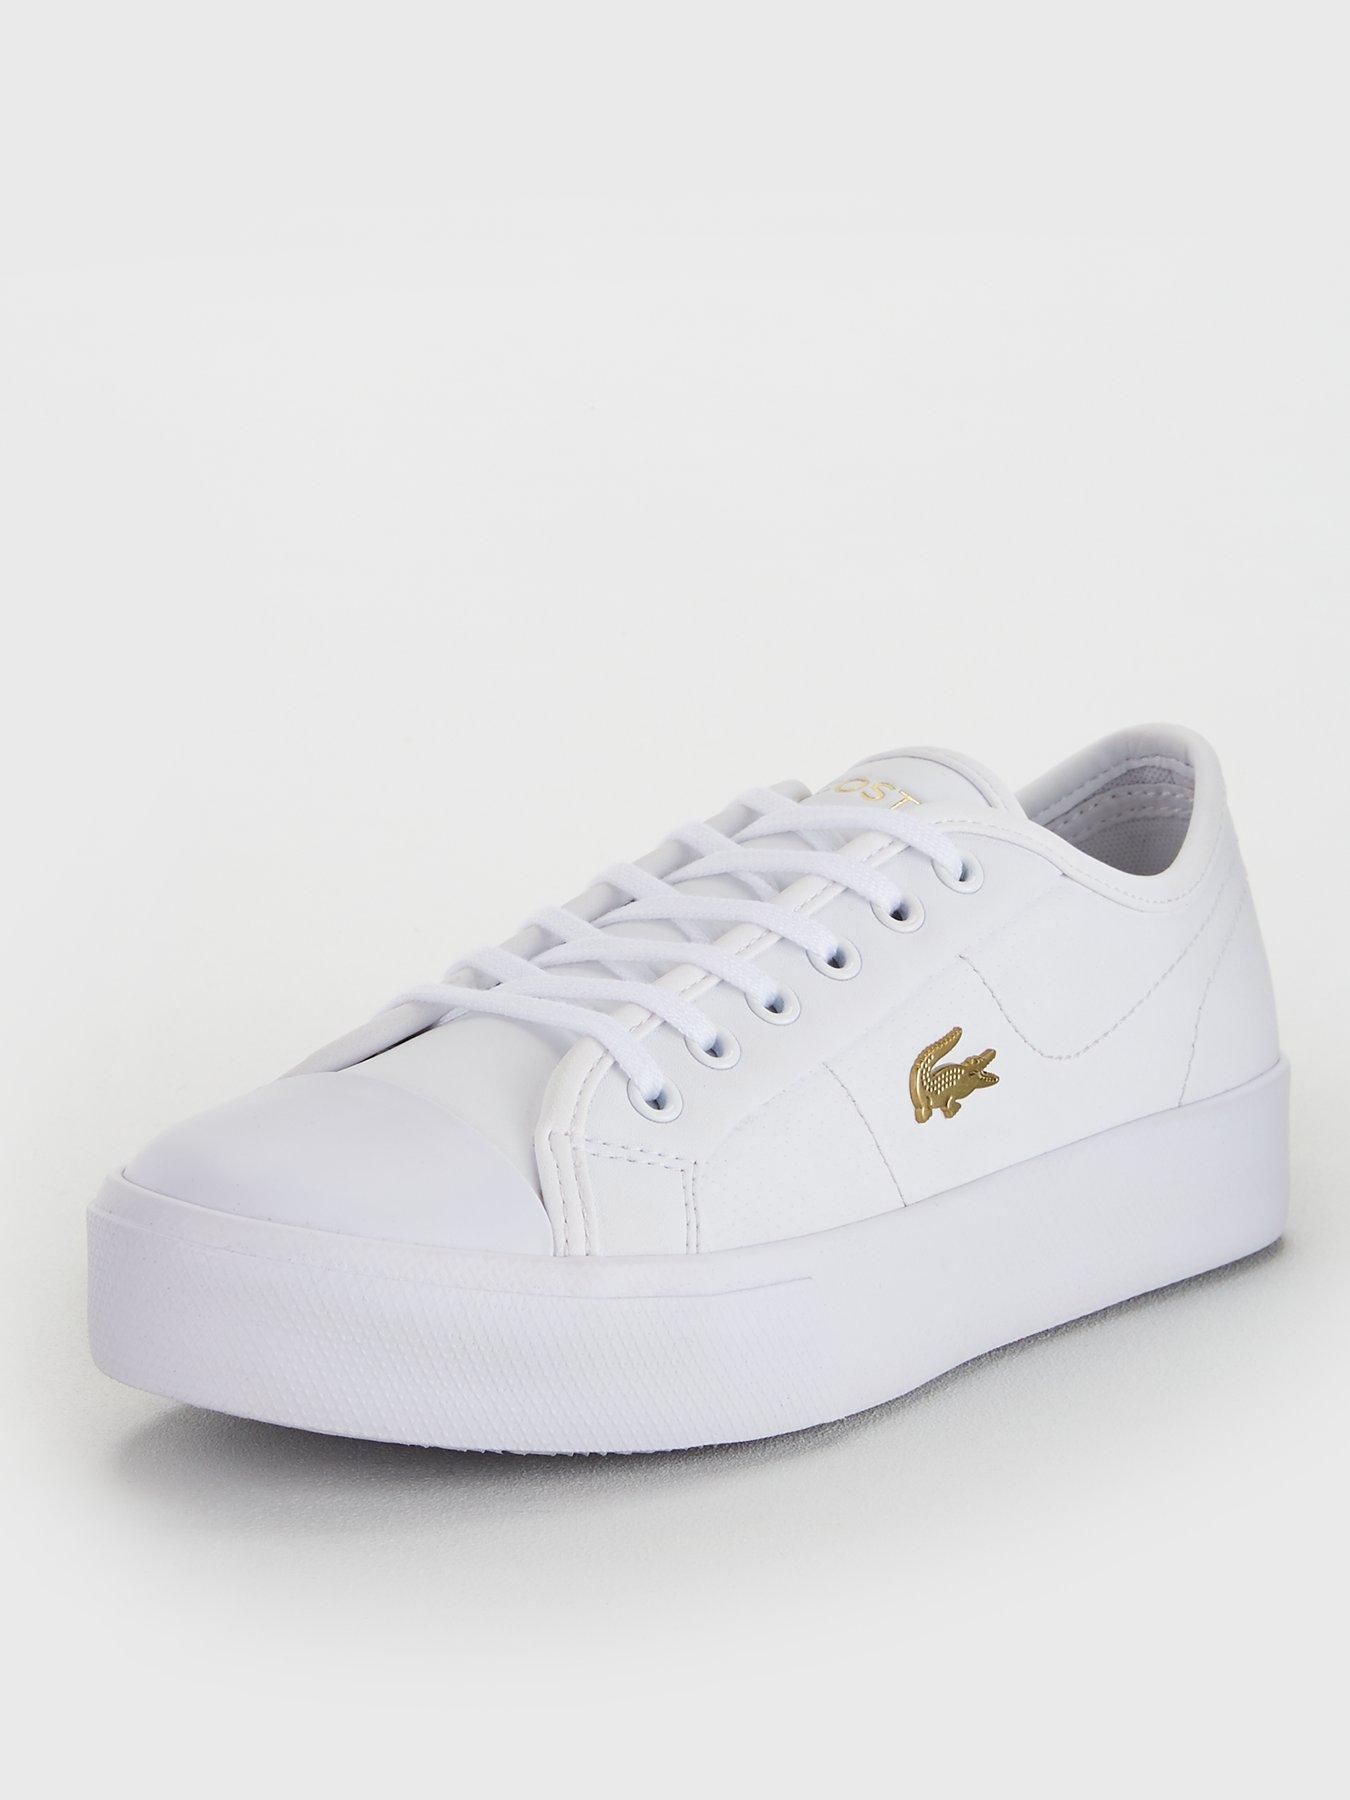 lacoste white shoes outfit